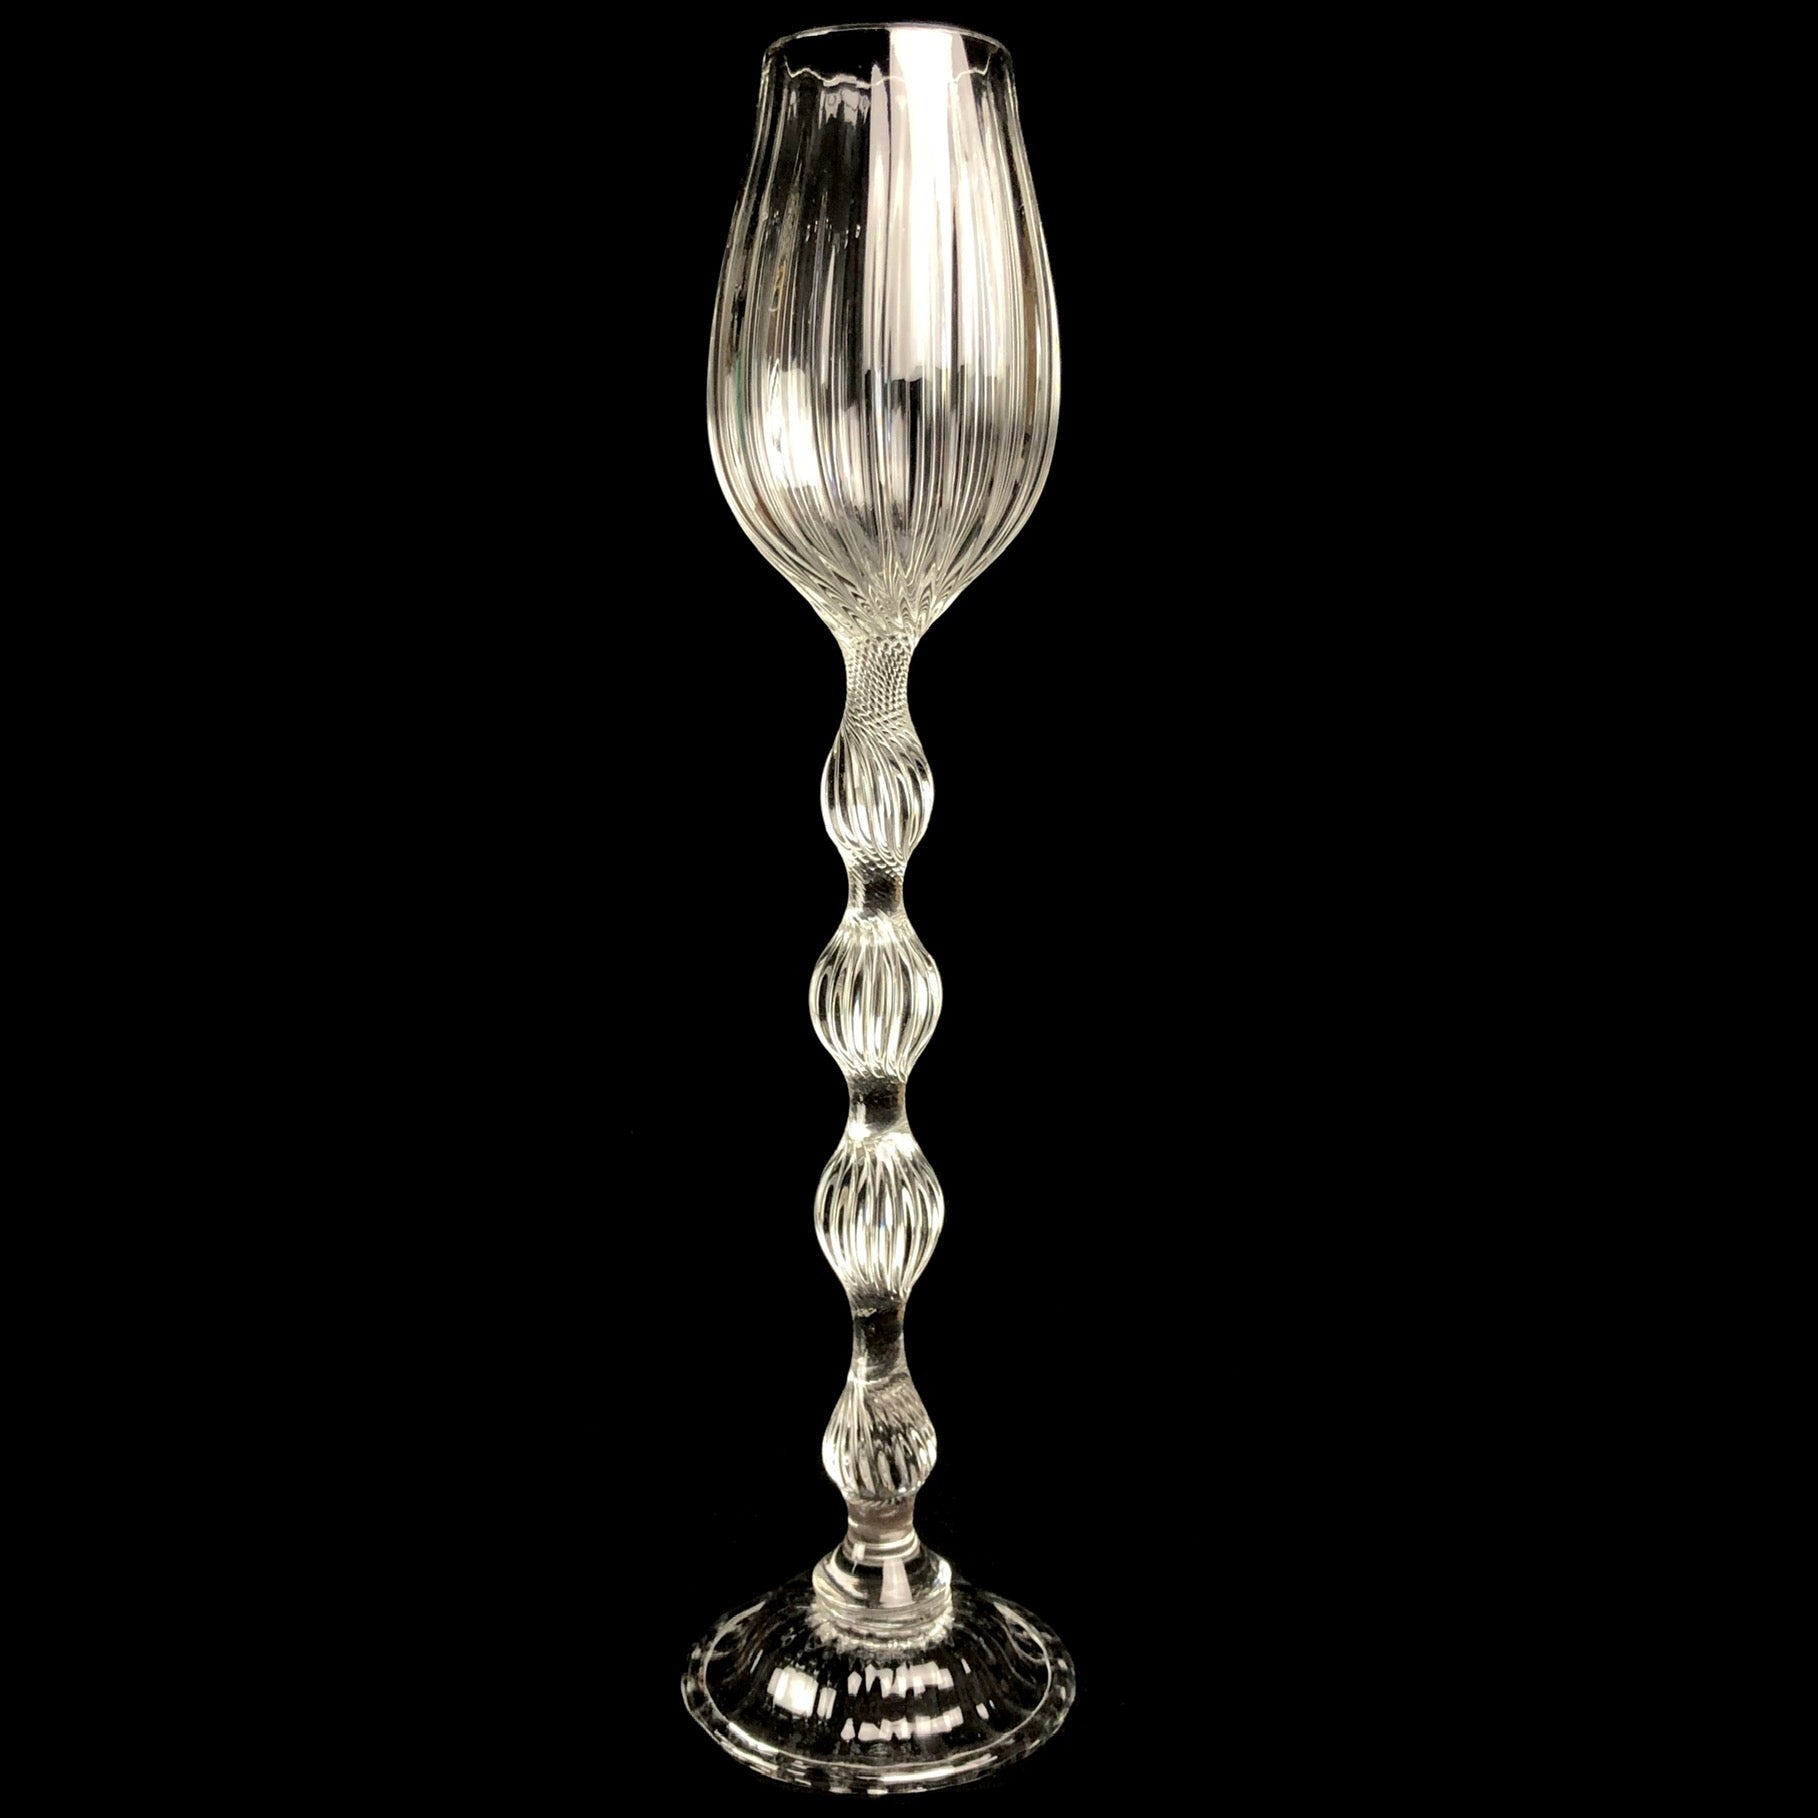 Clear glass goblet with ornate ribbing and detailed stem